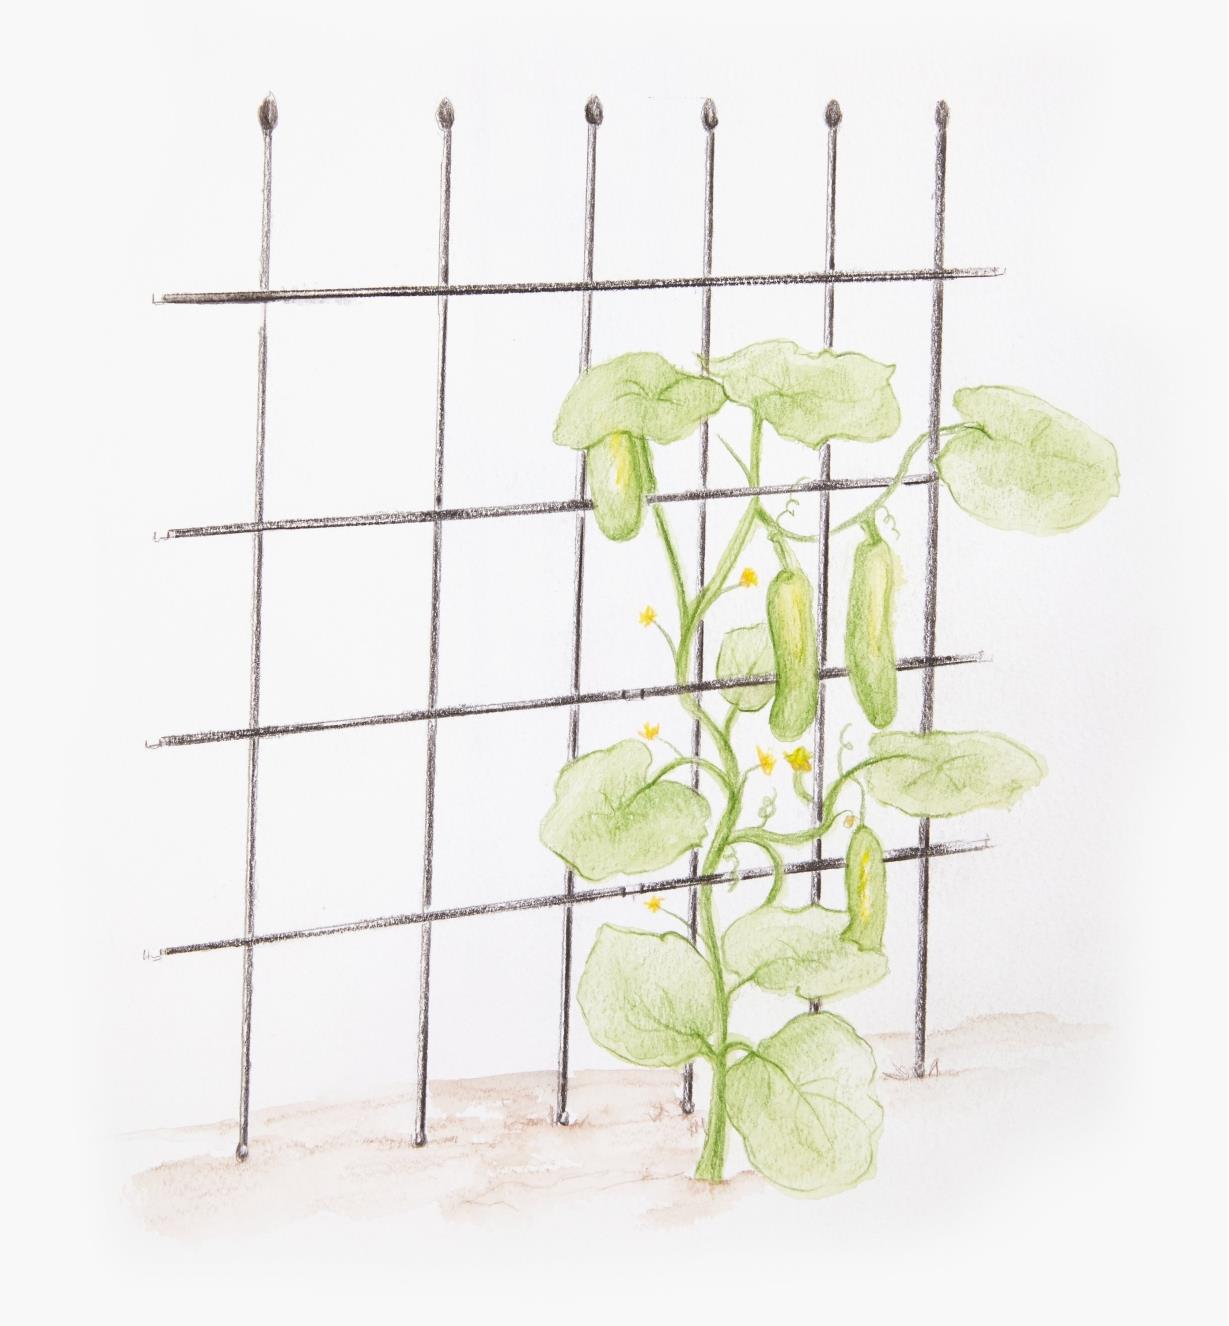 Illustration showing a climbing plant supported by the flexible multi-shape trellis